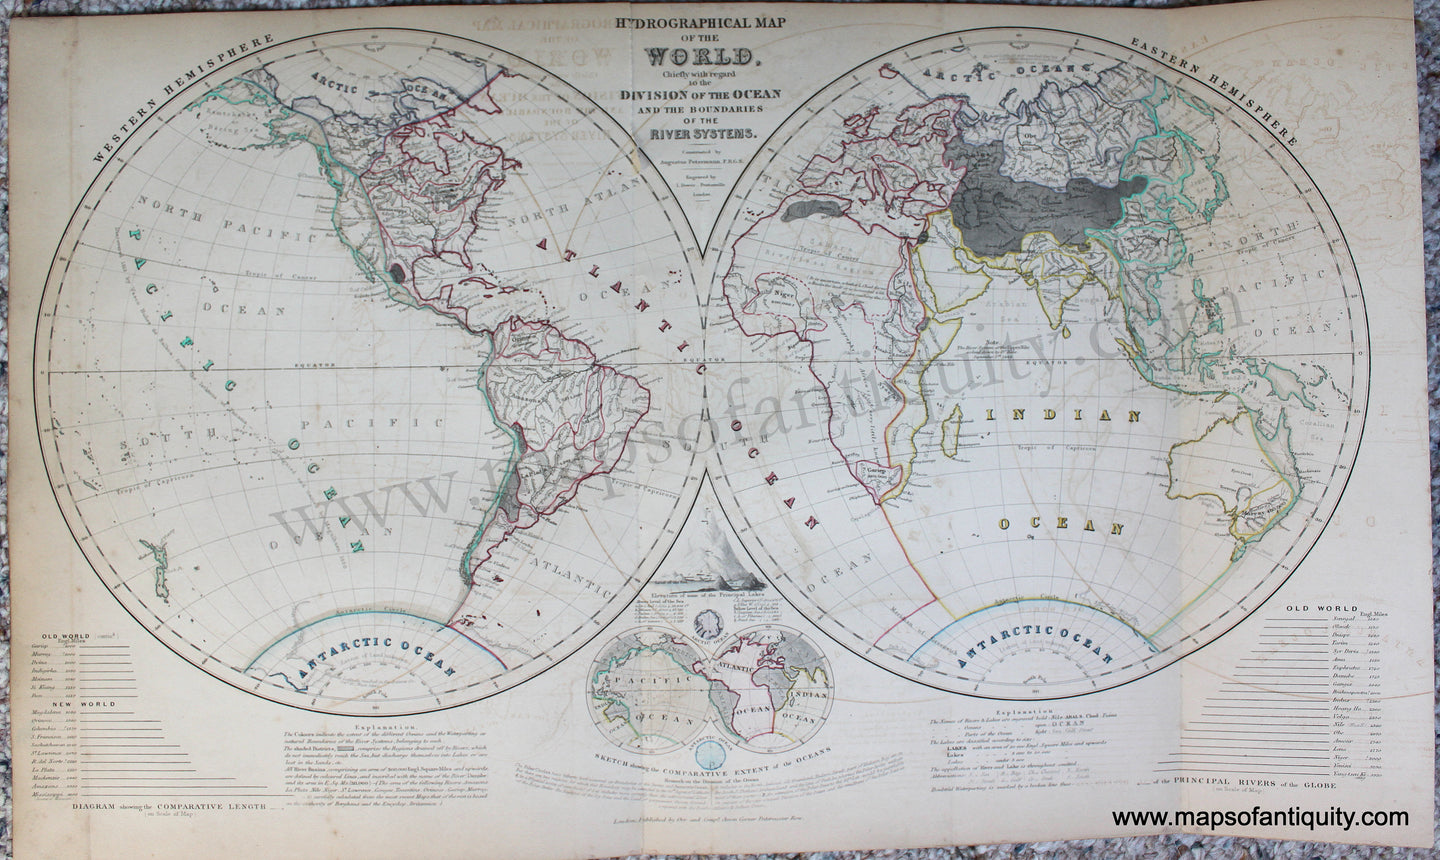 Genuine-Antique-Map-Hydrographical-Map-of-the-World-Chiefly-with-regard-to-the-Division-of-the-Ocean-and-the-Boundaries-of-the-River-Systems.-World--1850-Petermann-/-Orr-/-Dower-Maps-Of-Antiquity-1800s-19th-century